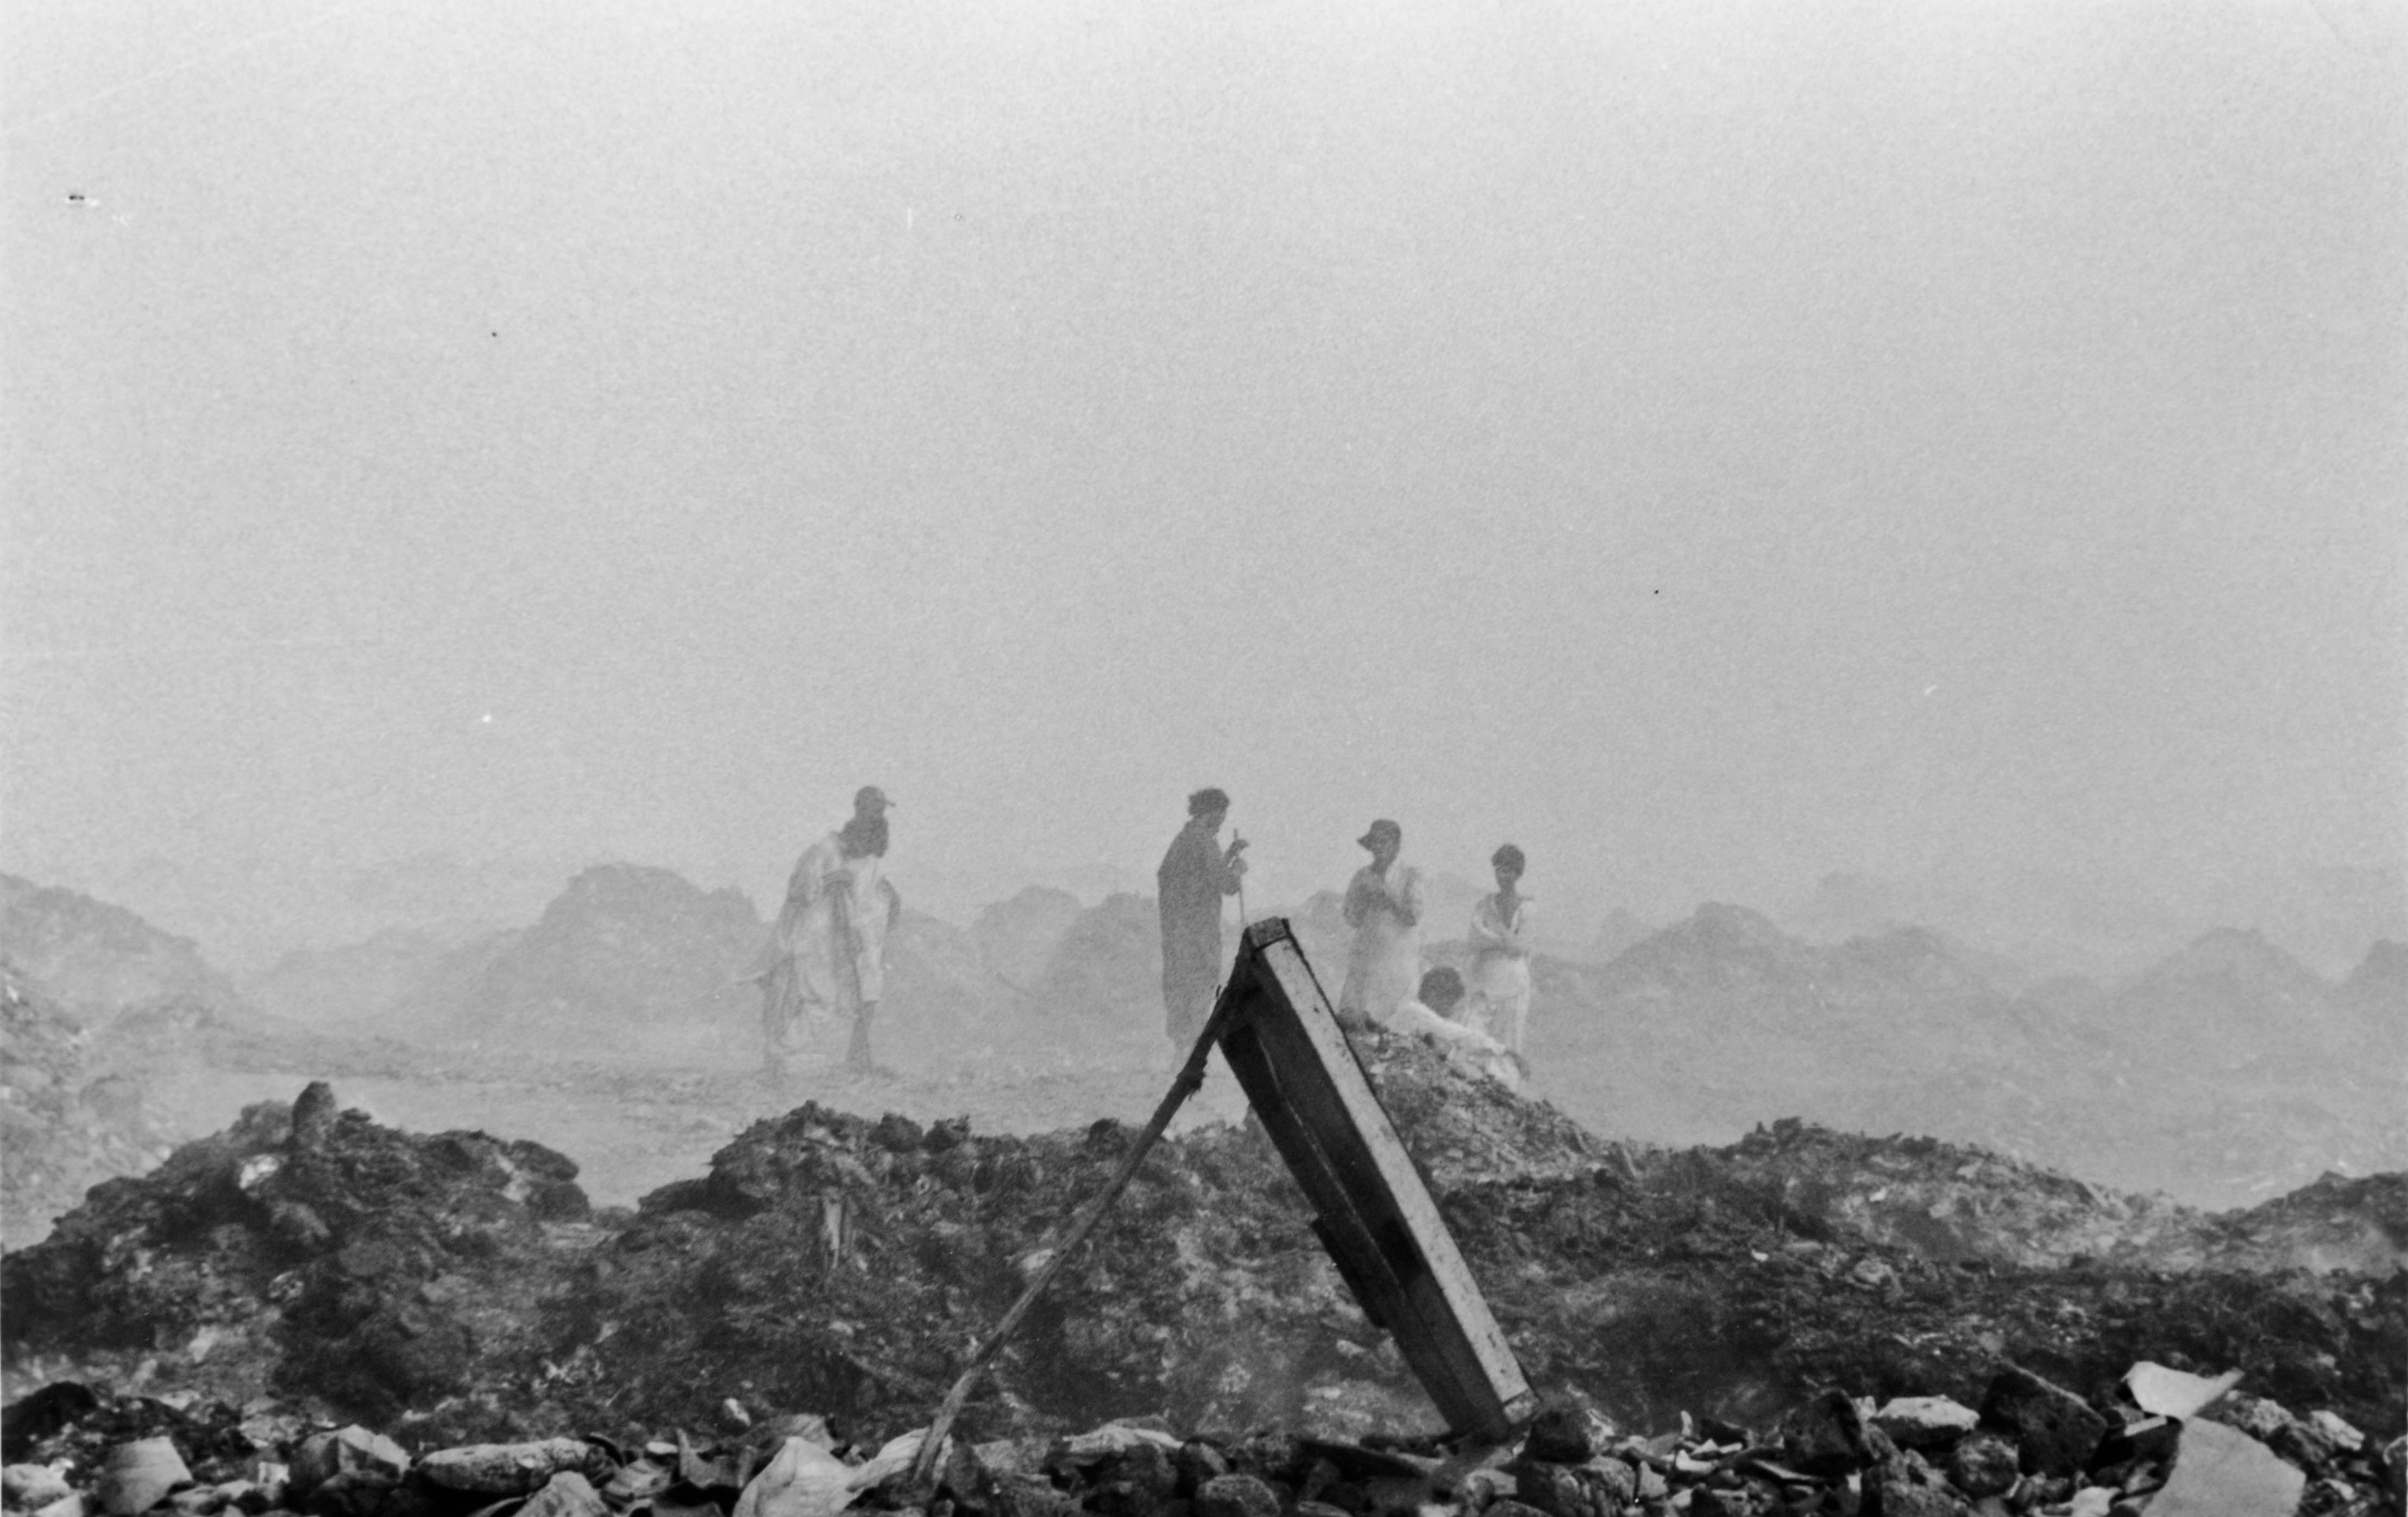 workers take a break from sifting through landfill